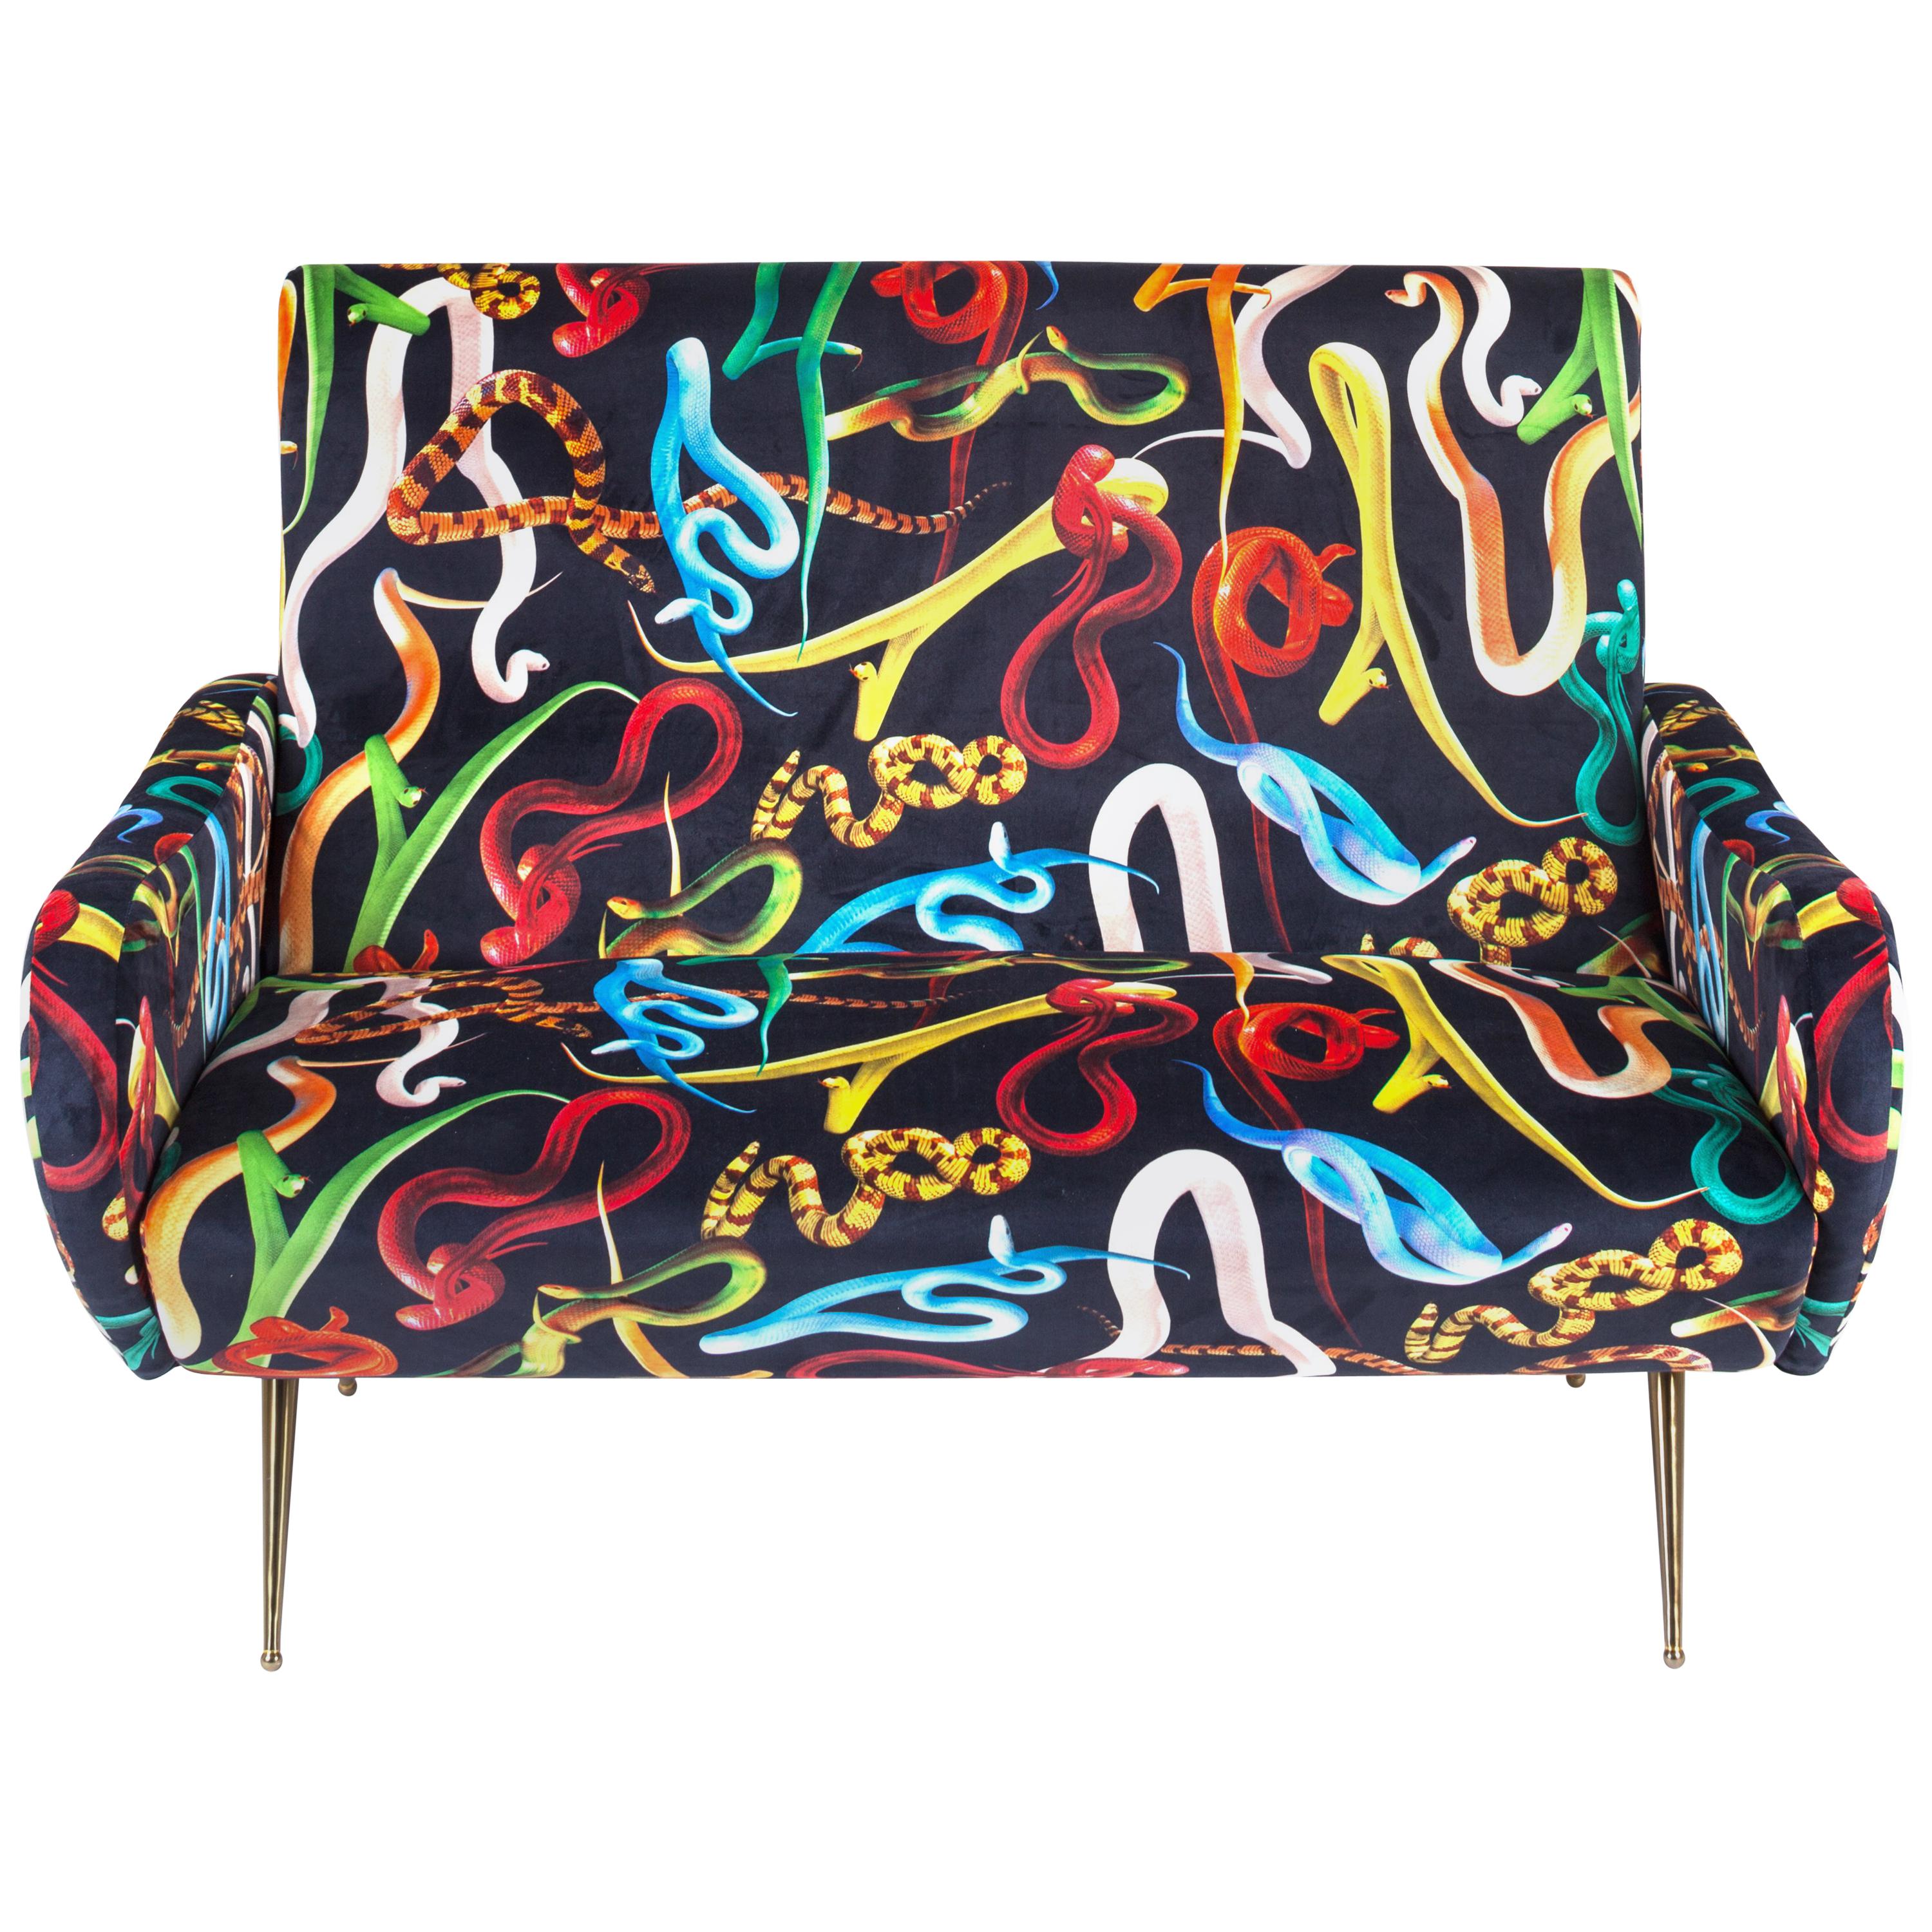 Seletti "Snakes" Upholstered Two-Seat Sofa by Toiletpaper For Sale